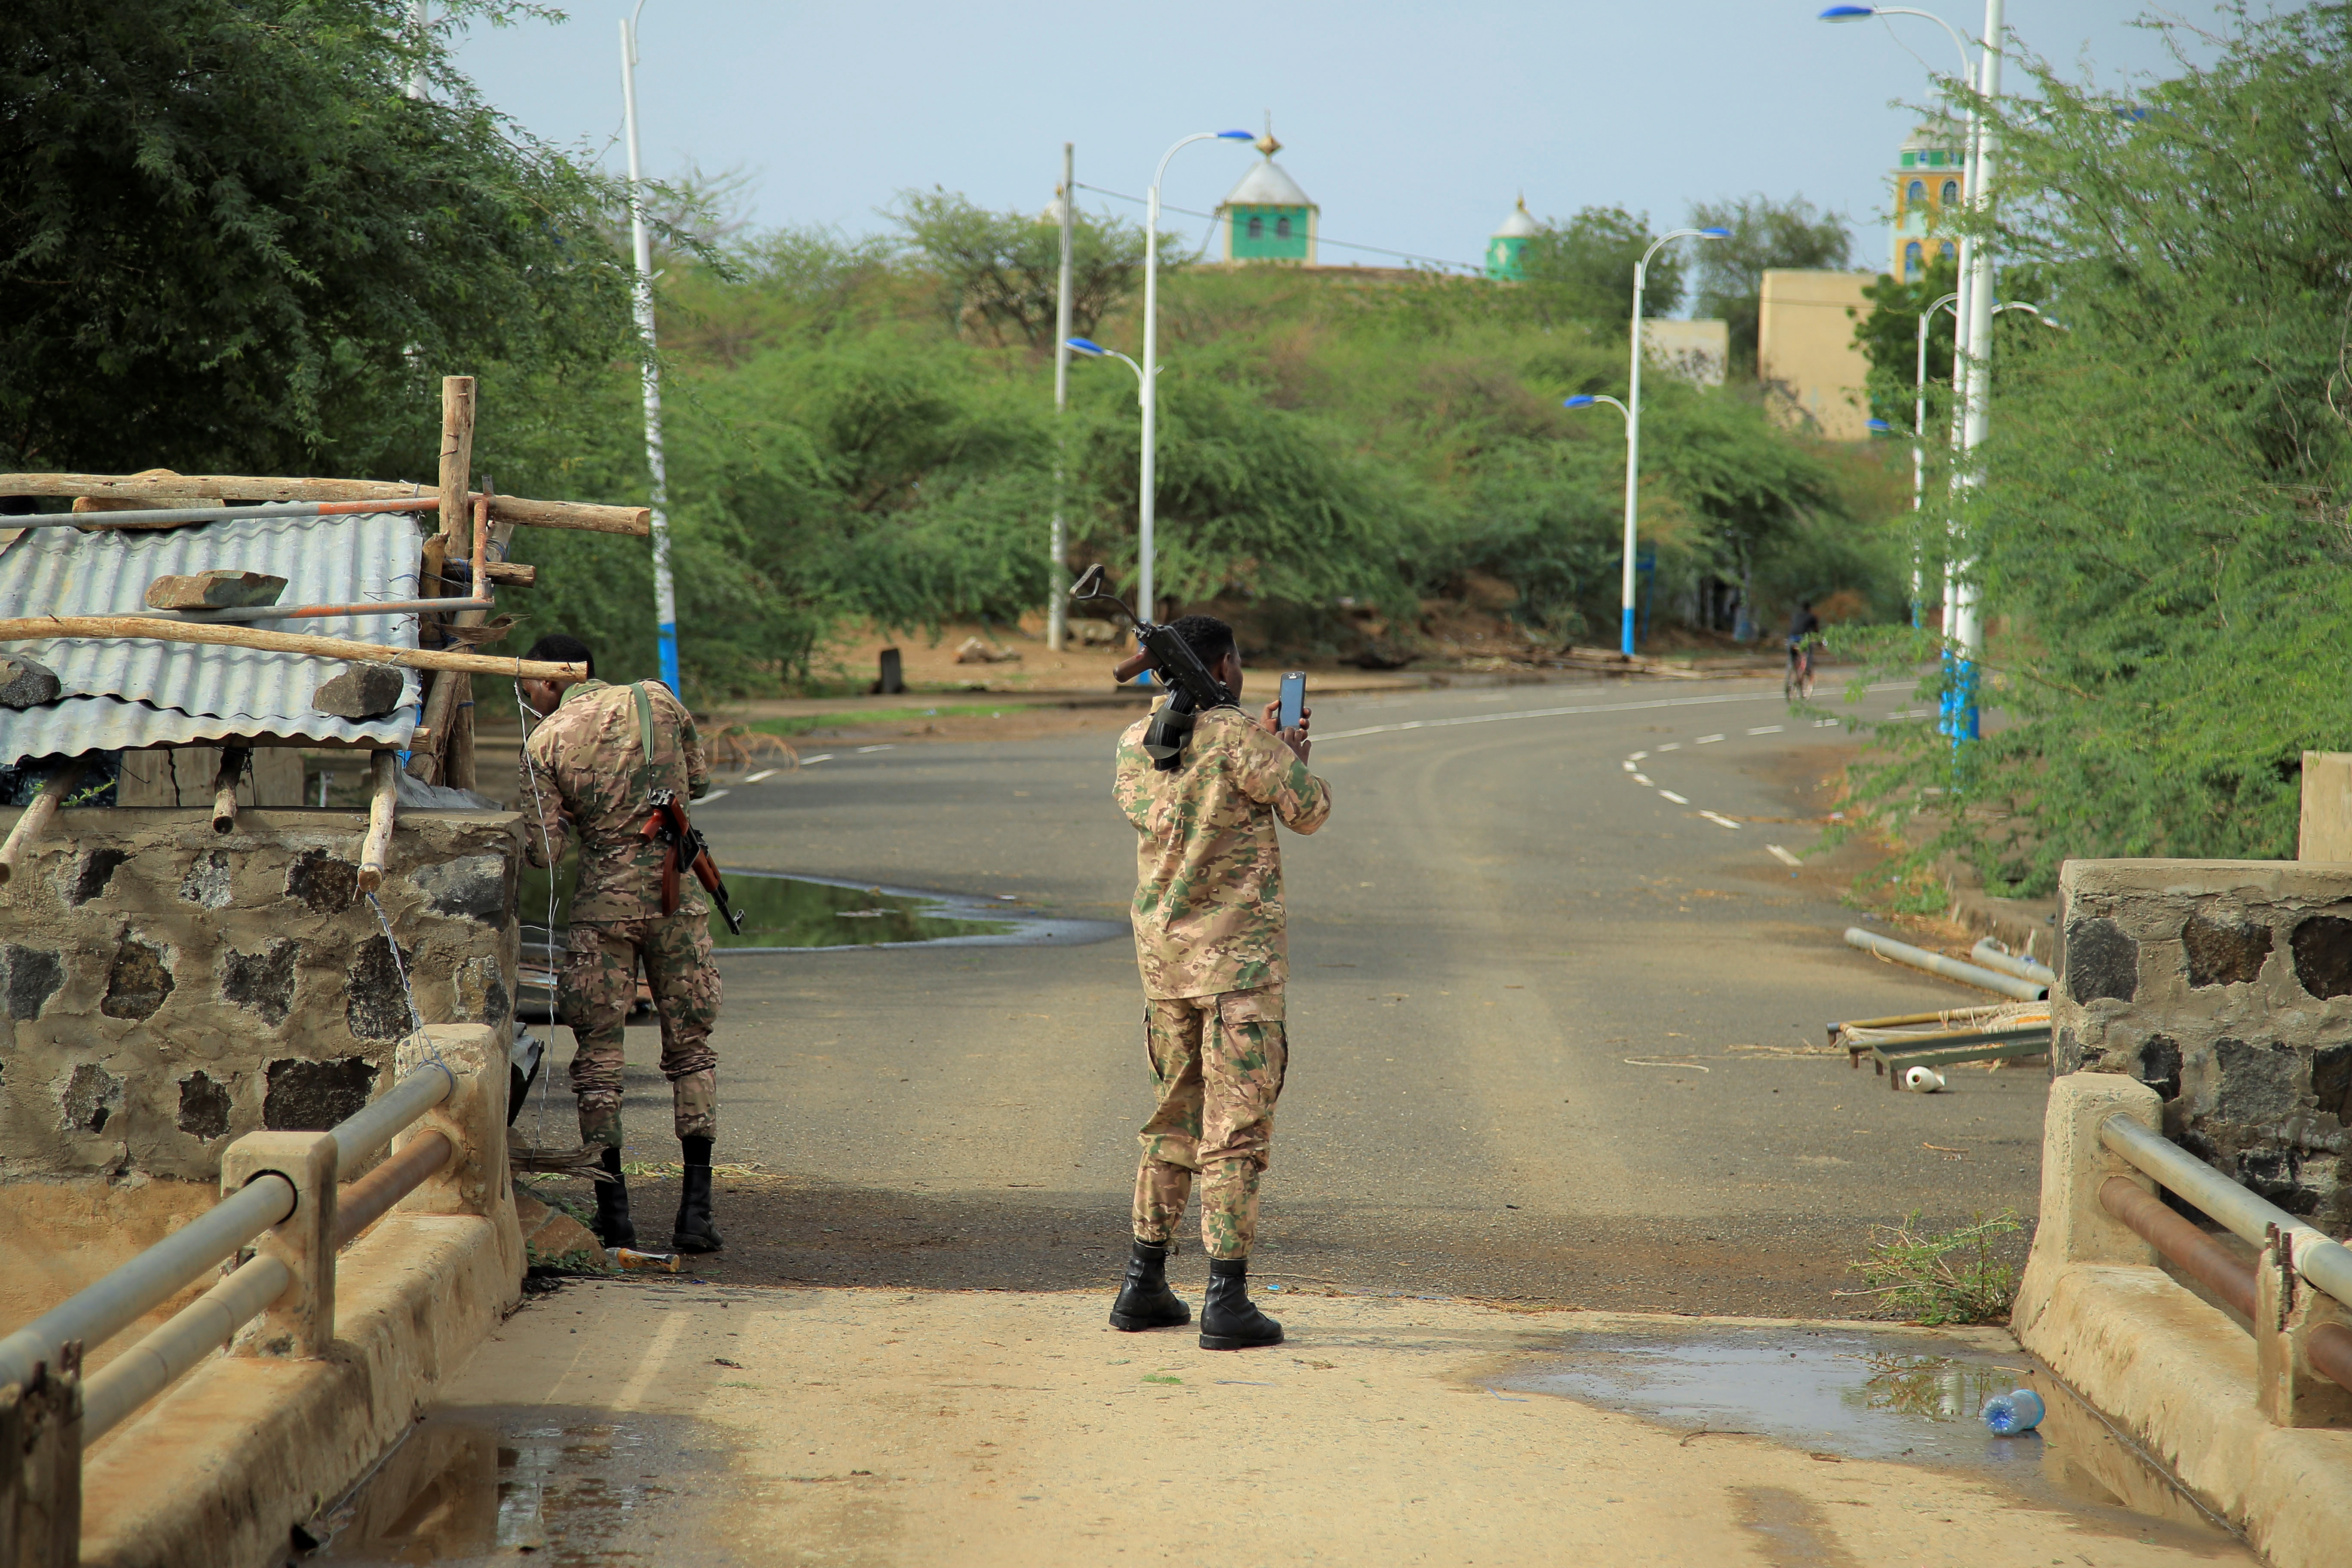 Members of Amhara special forces stand guard on the Ethiopia-Eritrean border near the town of Humera